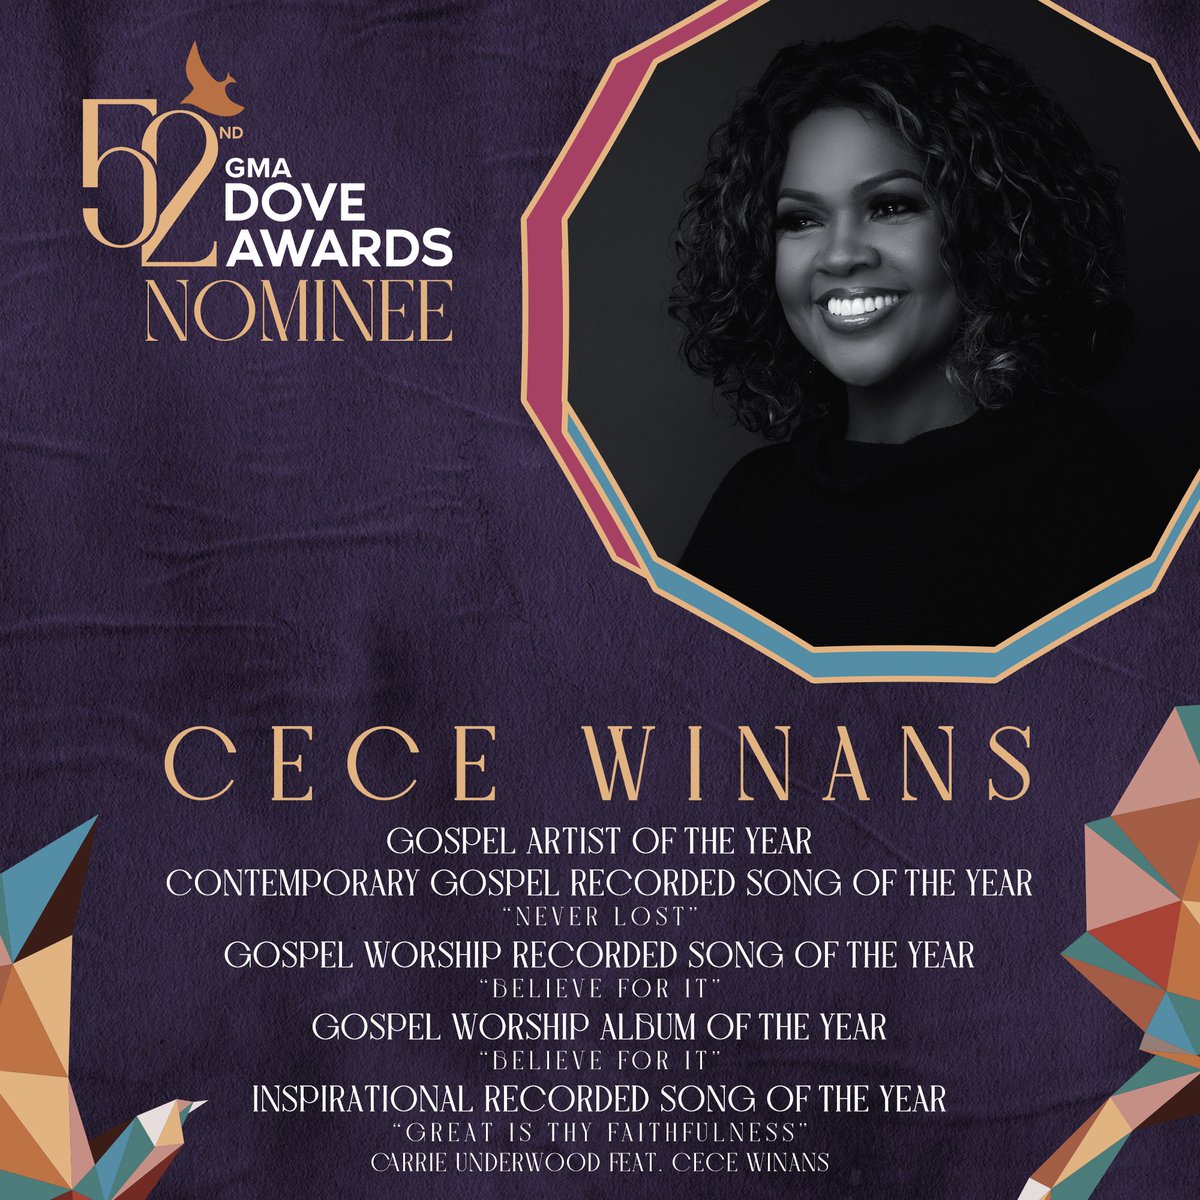 Thank you for the nominations @gospelmusicassoc! 💜#doveawards2021